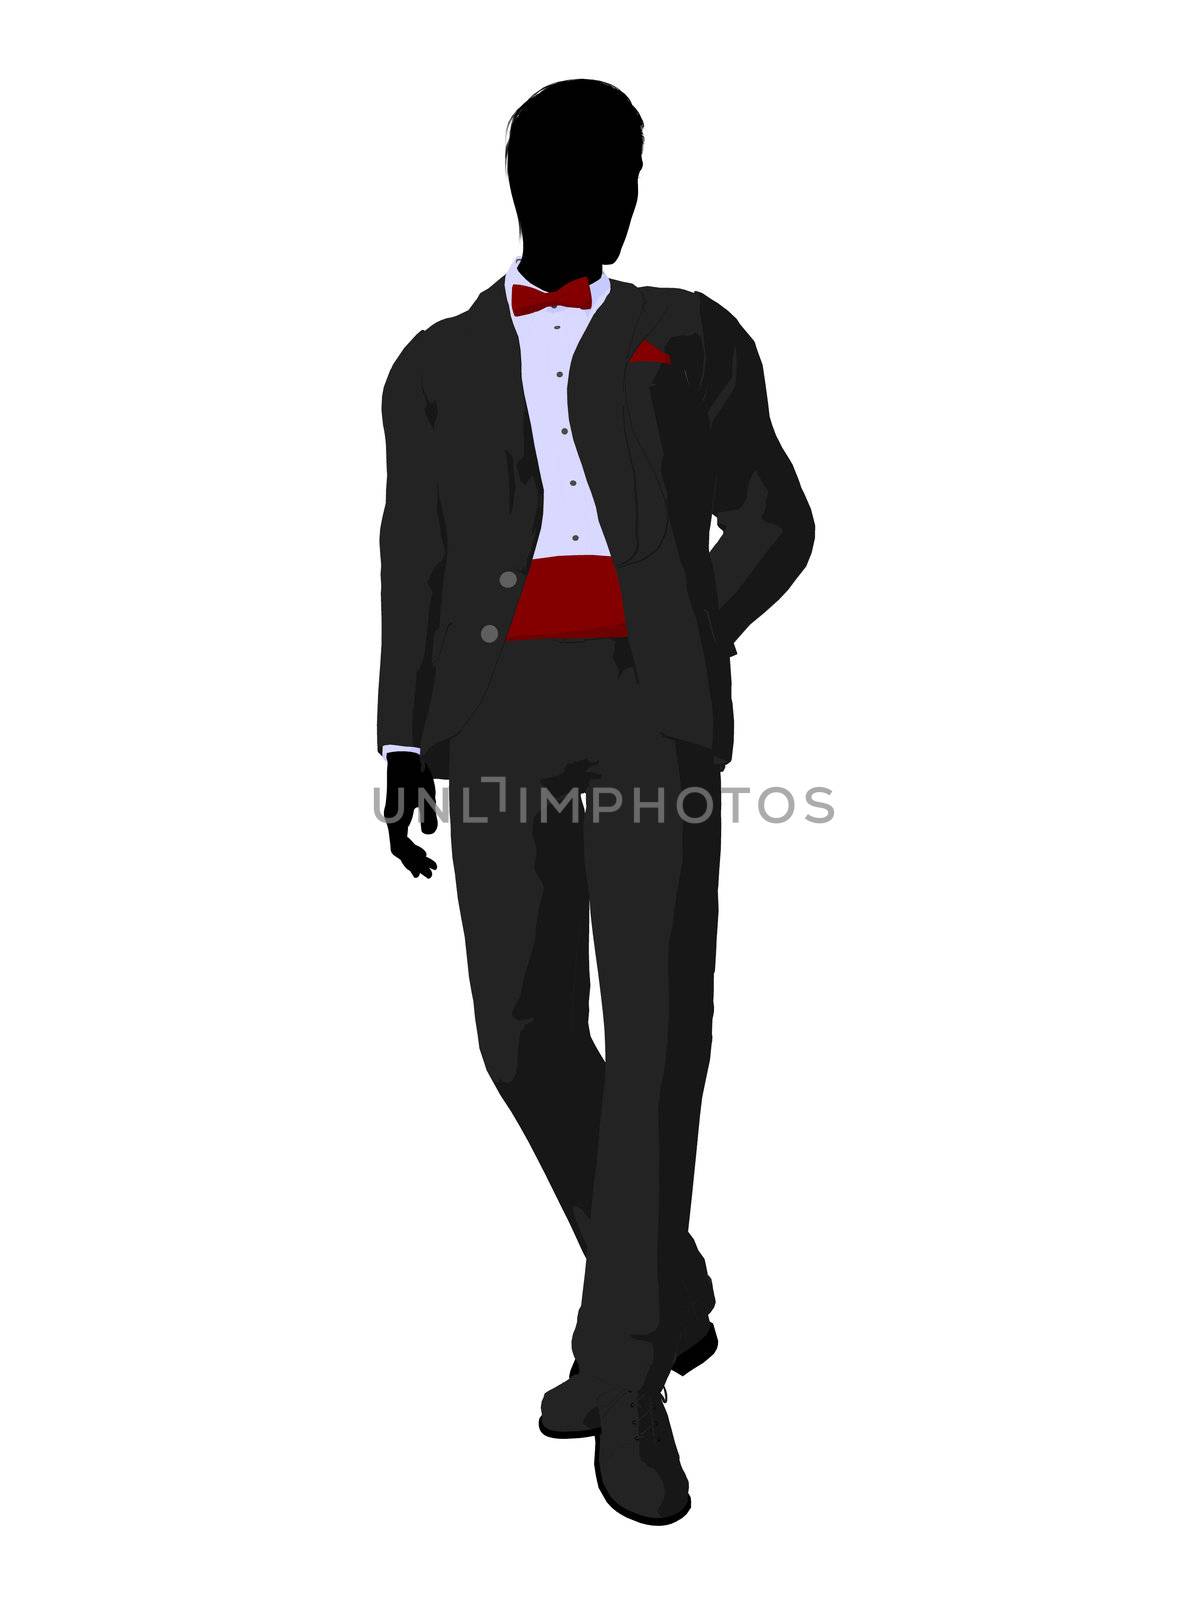 Wedding groom in a tuxedo silhouette illustration on a white background